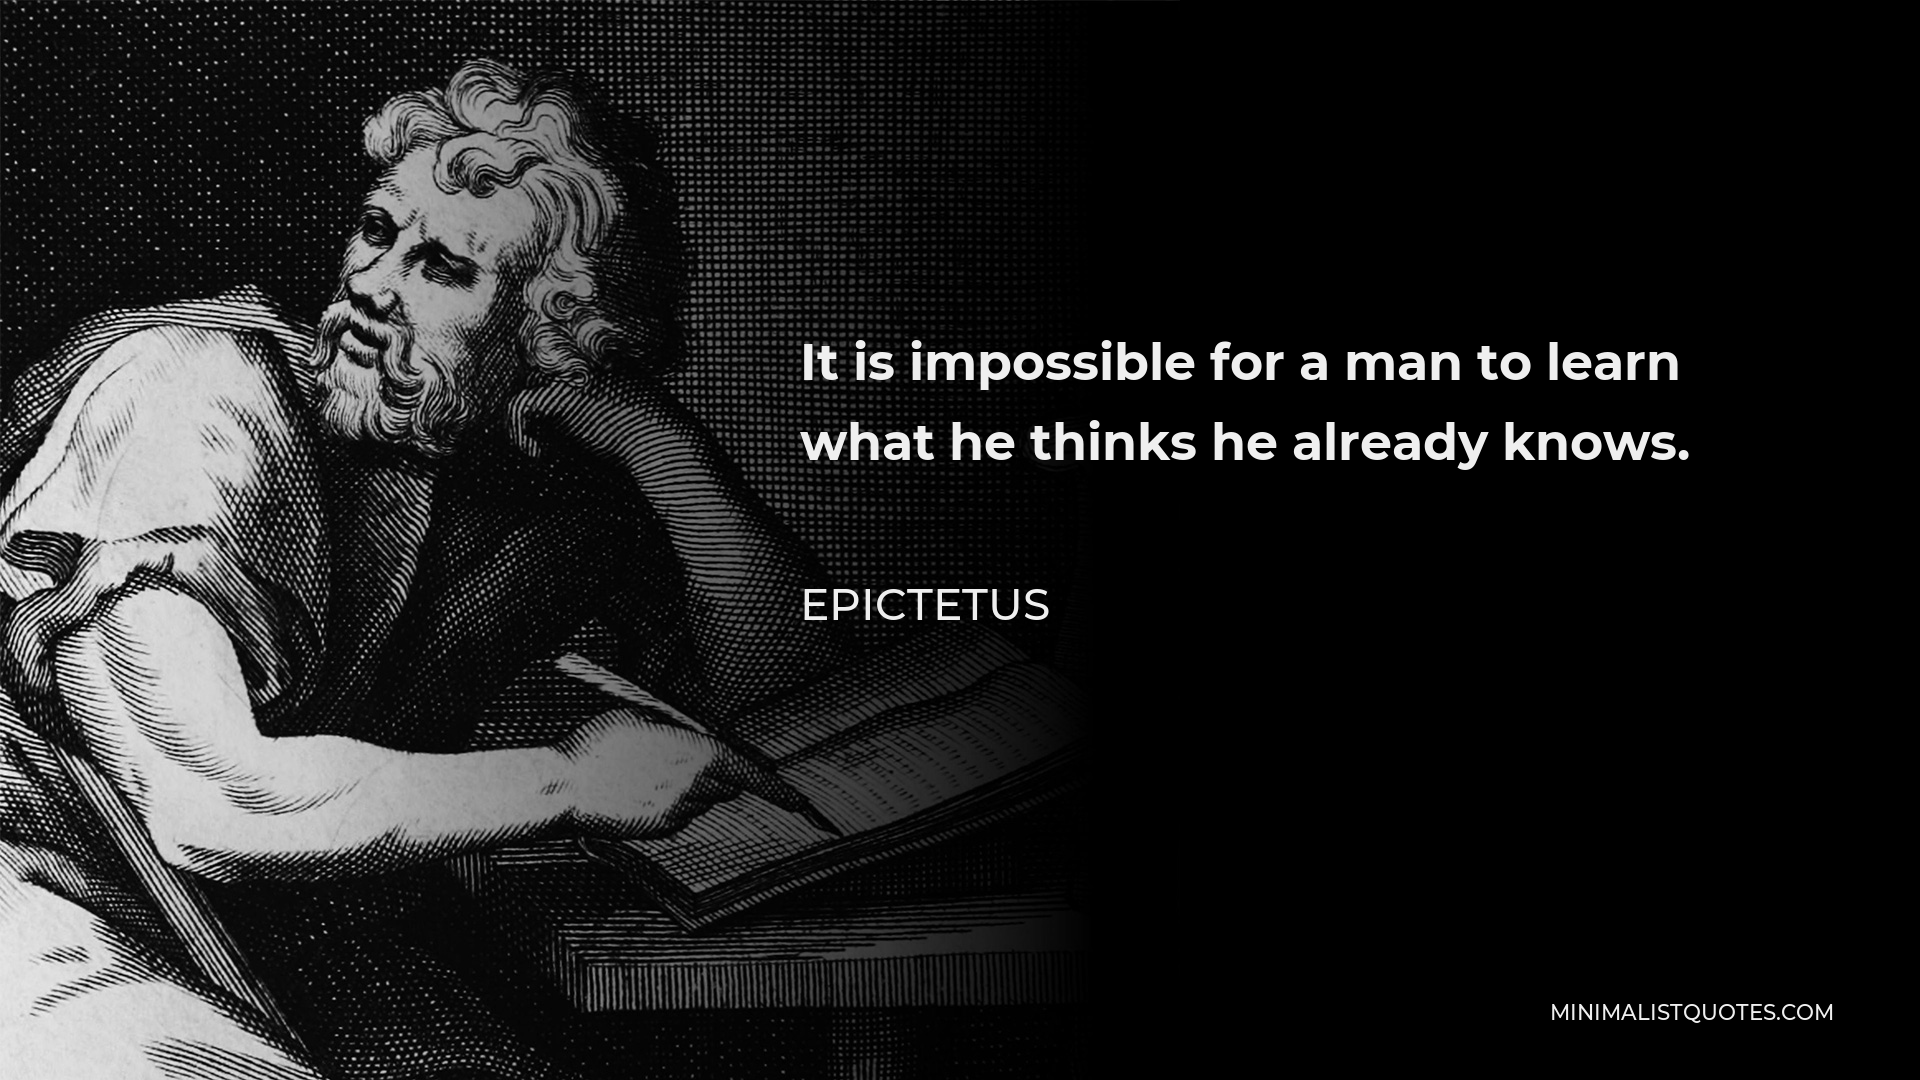 Epictetus Quote - It is impossible for a man to learn what he thinks he already knows.